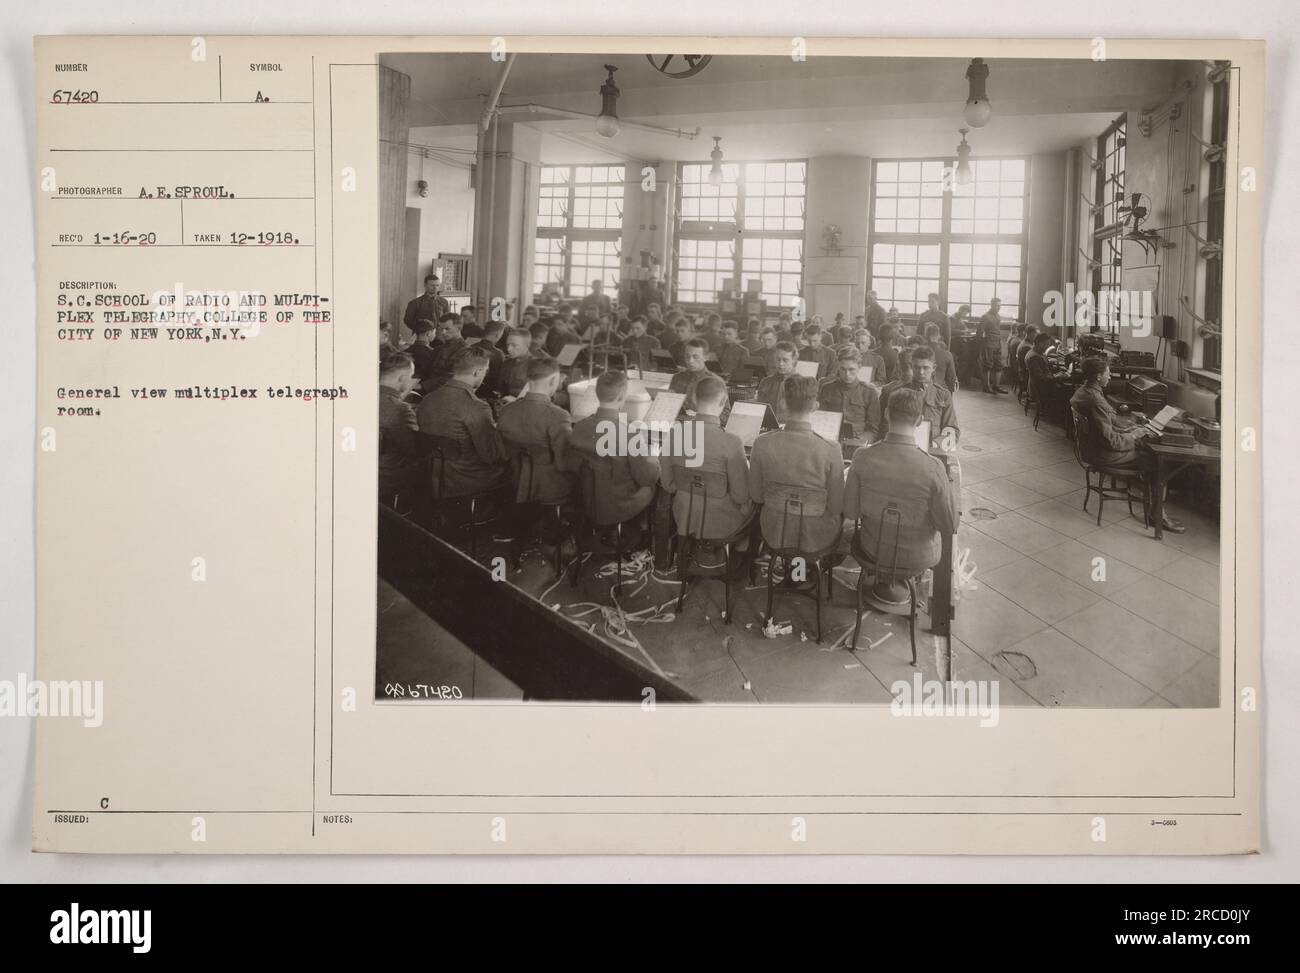 'General view of the multiplex telegraph room at the S.C. School of Radio and Multiplex Telegraphy, part of the College of the City of New York. This photograph, taken in December 1918 by photographer A.E. Sproul, shows a bustling room with multiple operators working the telegraph system.' Stock Photo